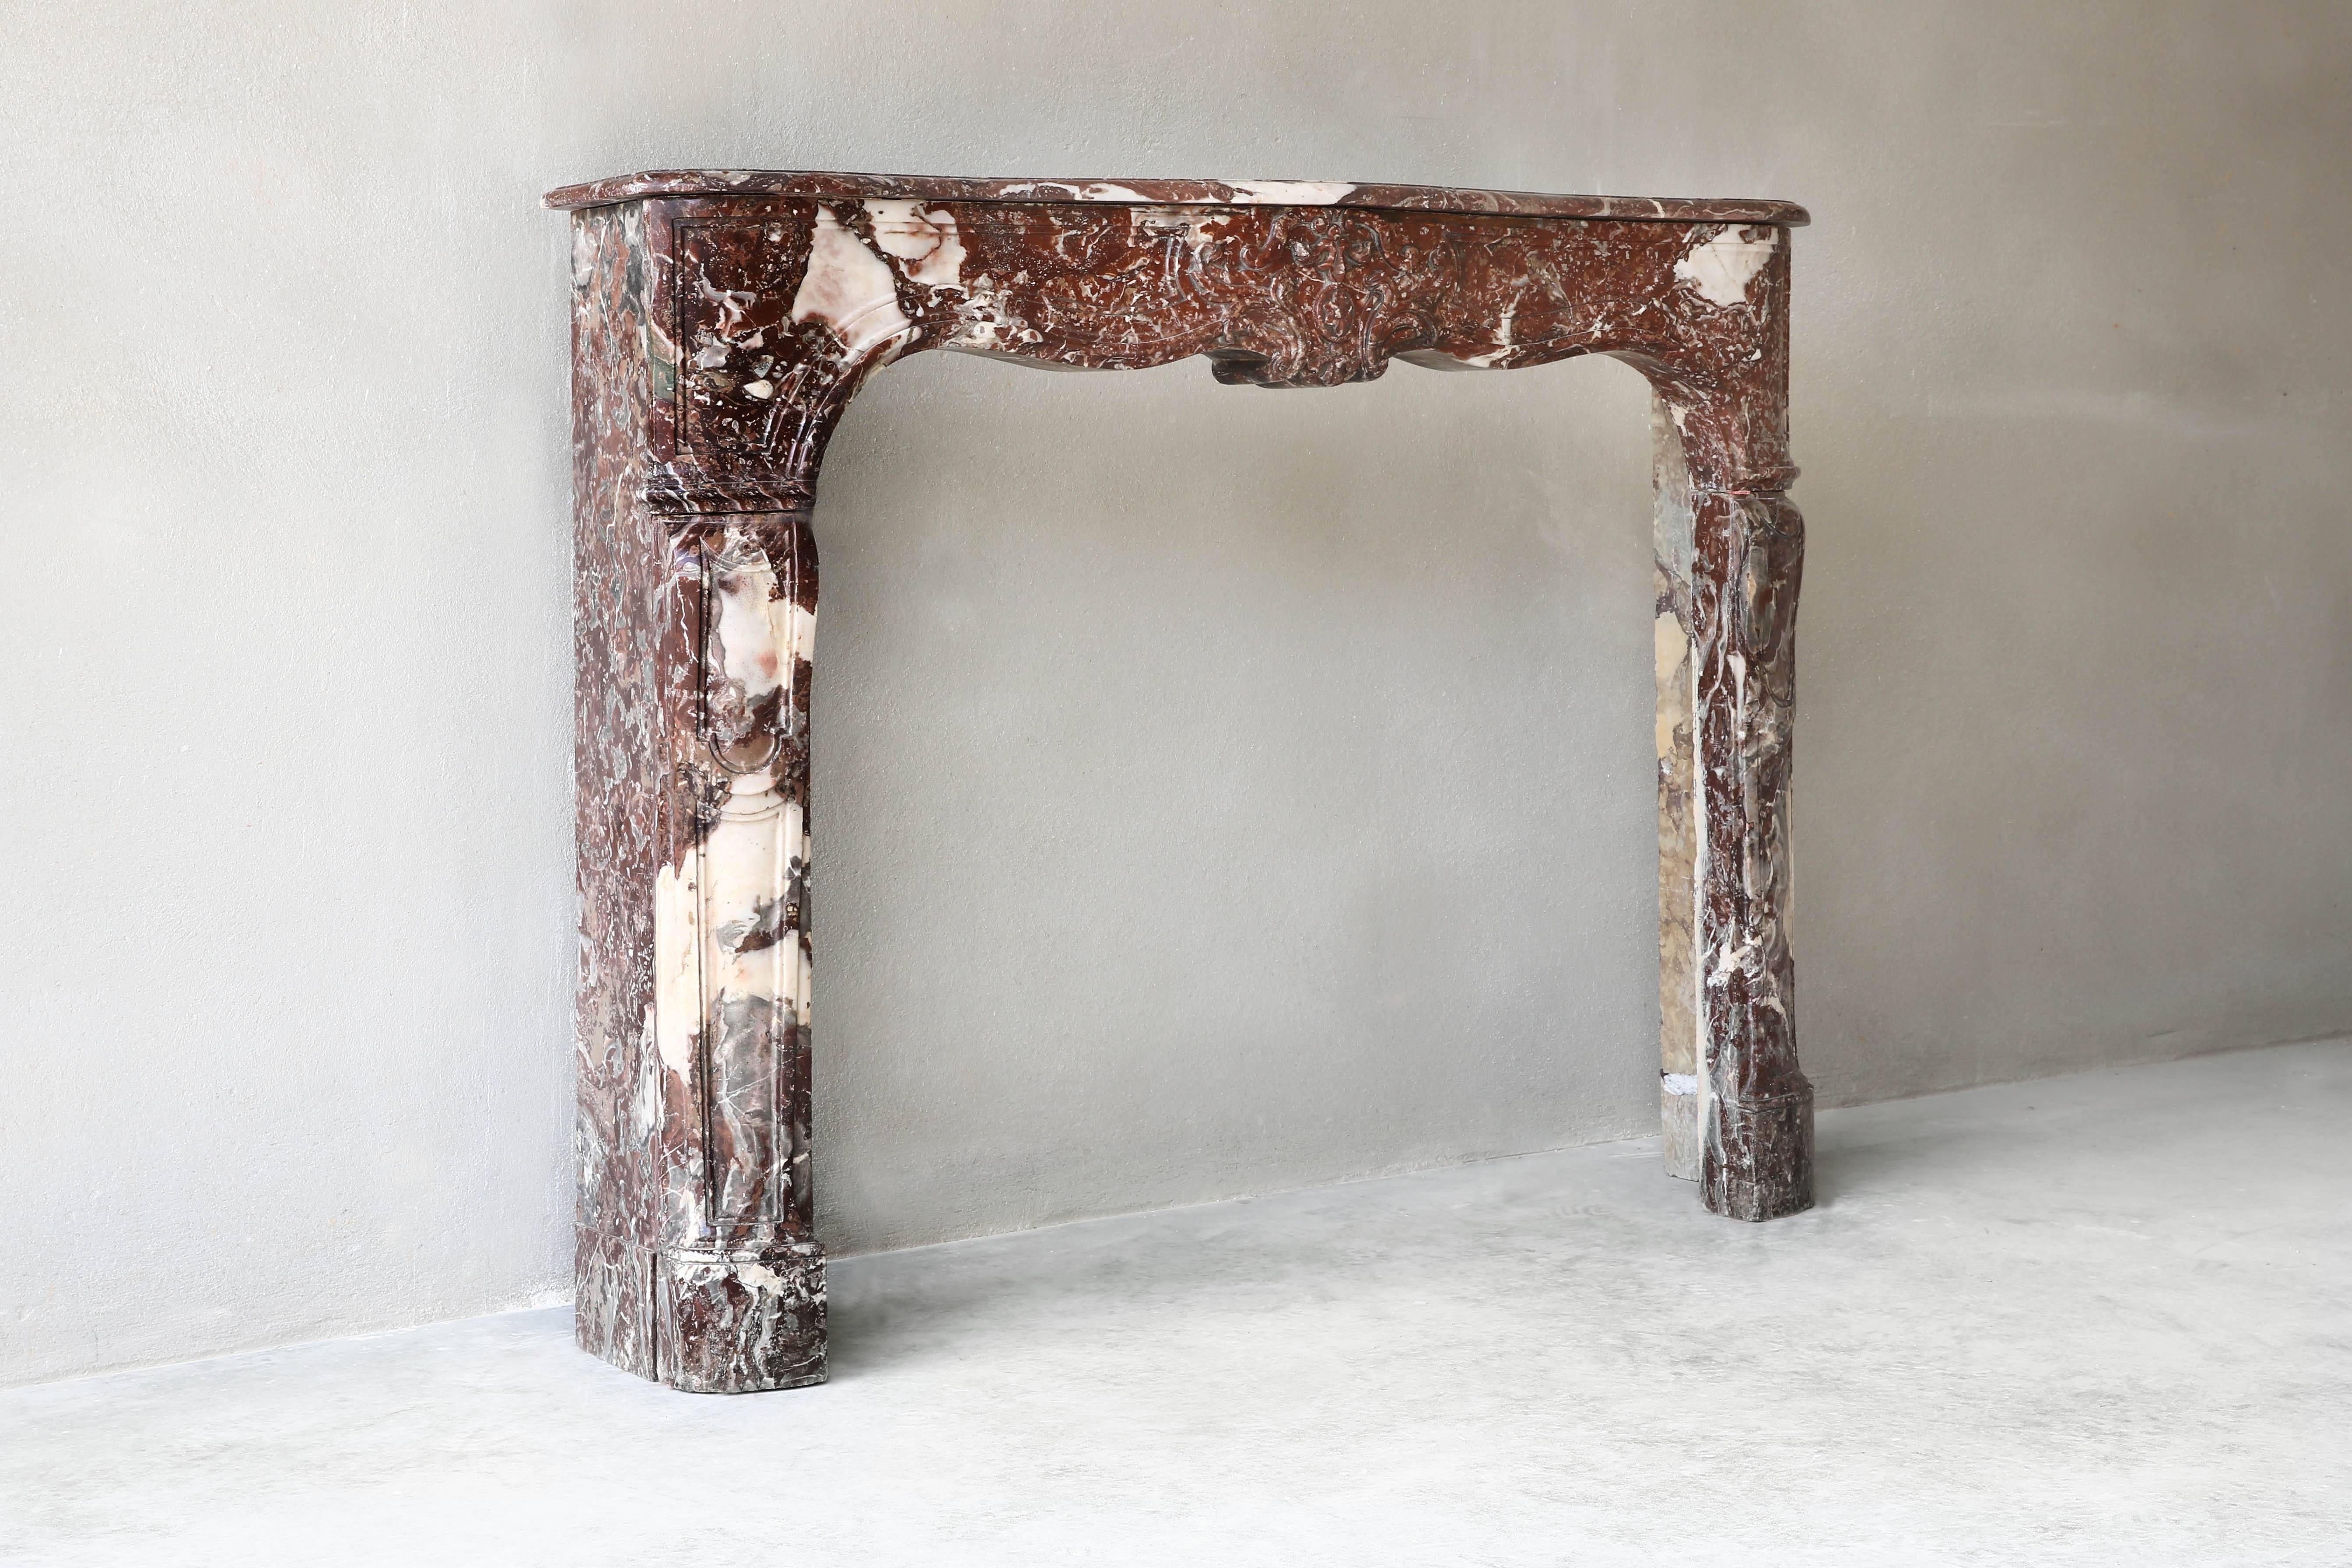 Charming antique marble fireplace of Griotte rouge de Belgique. This fireplace is from the 18th century in the style of Louis XV.